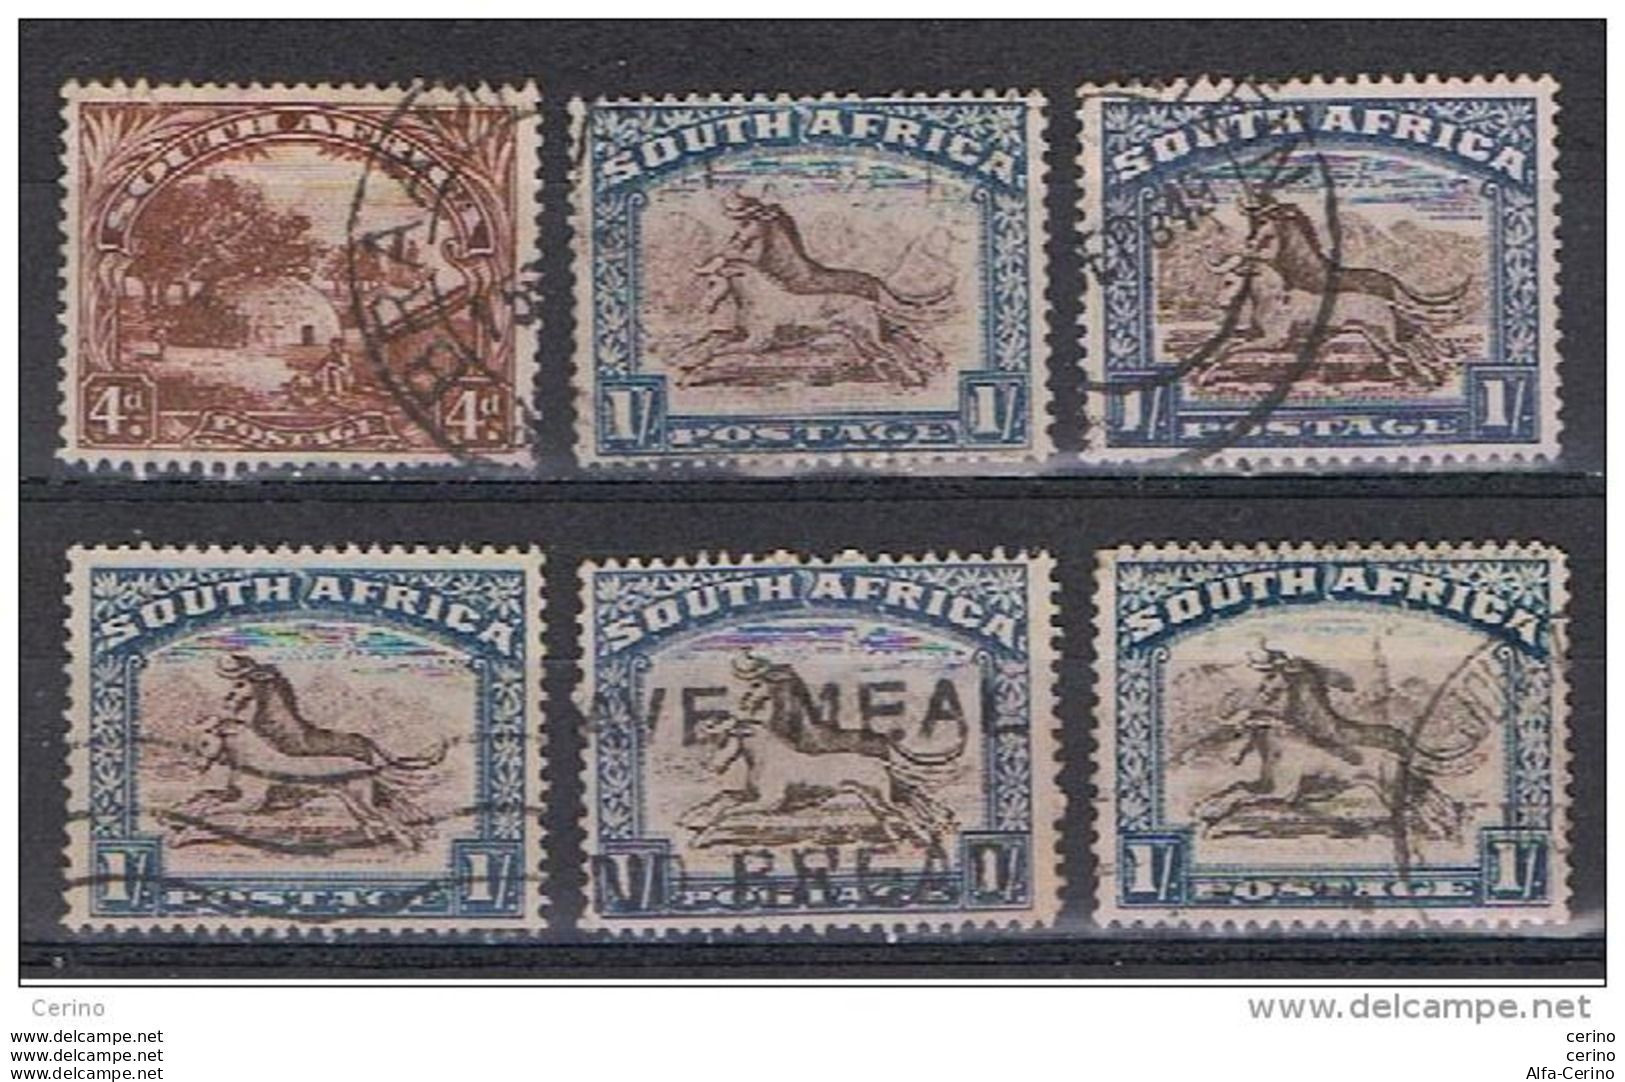 SOUTH   AFRICA:  1927/28  ORDINARY  SERIES  -  LOT  6  USED  STAMPS  -  YV/TELL. 26 + 27x5 - Gebruikt